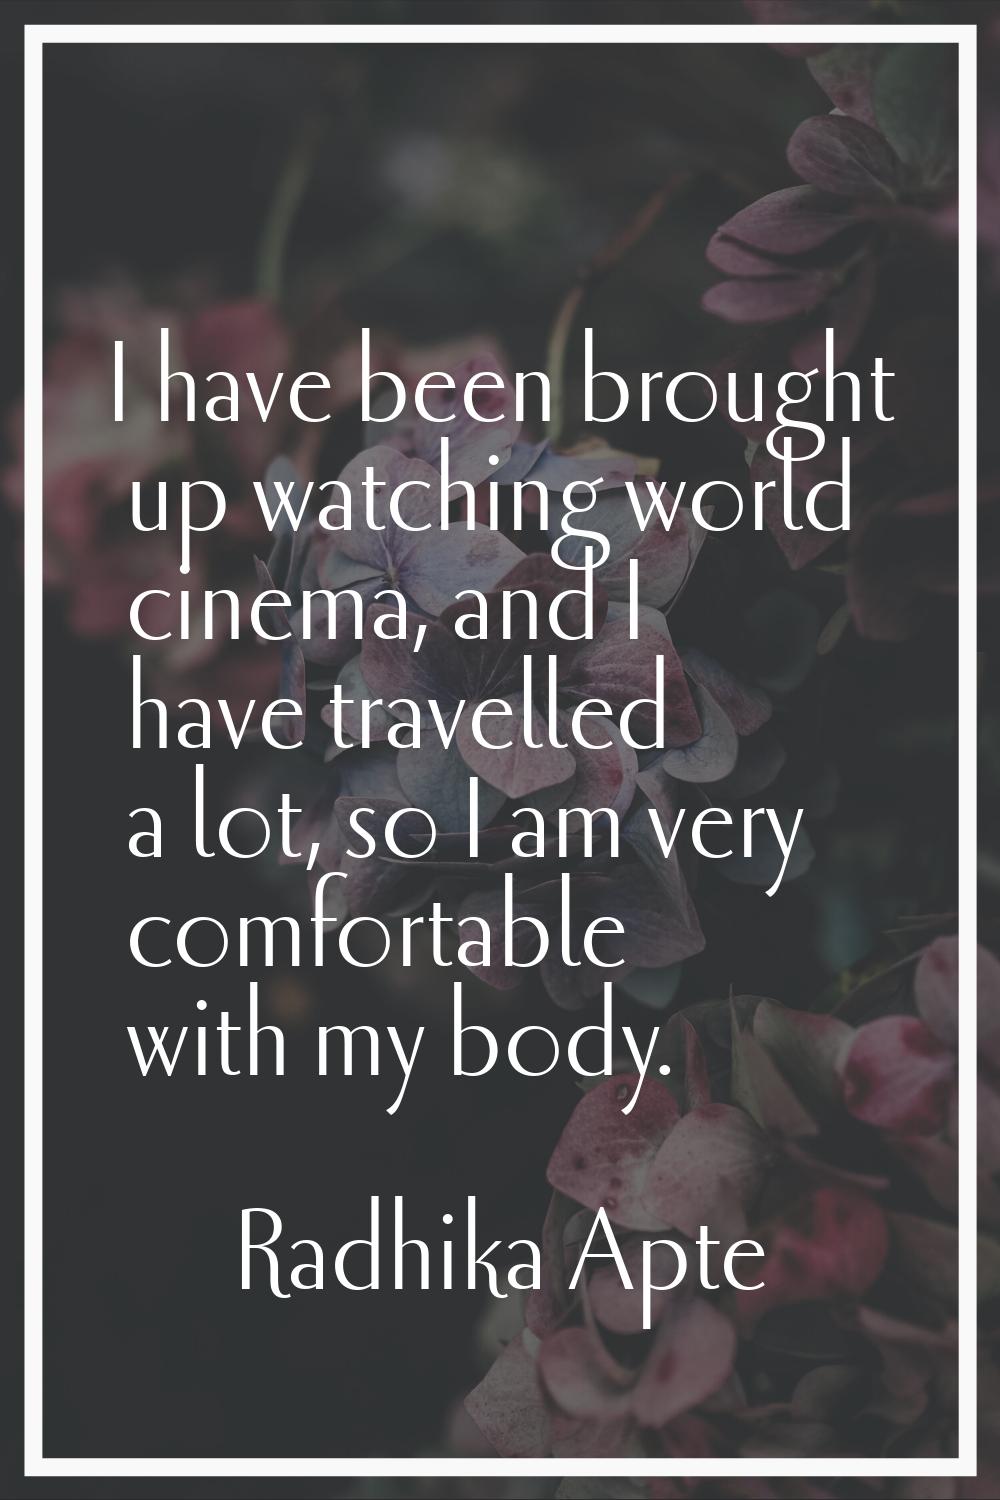 I have been brought up watching world cinema, and I have travelled a lot, so I am very comfortable 